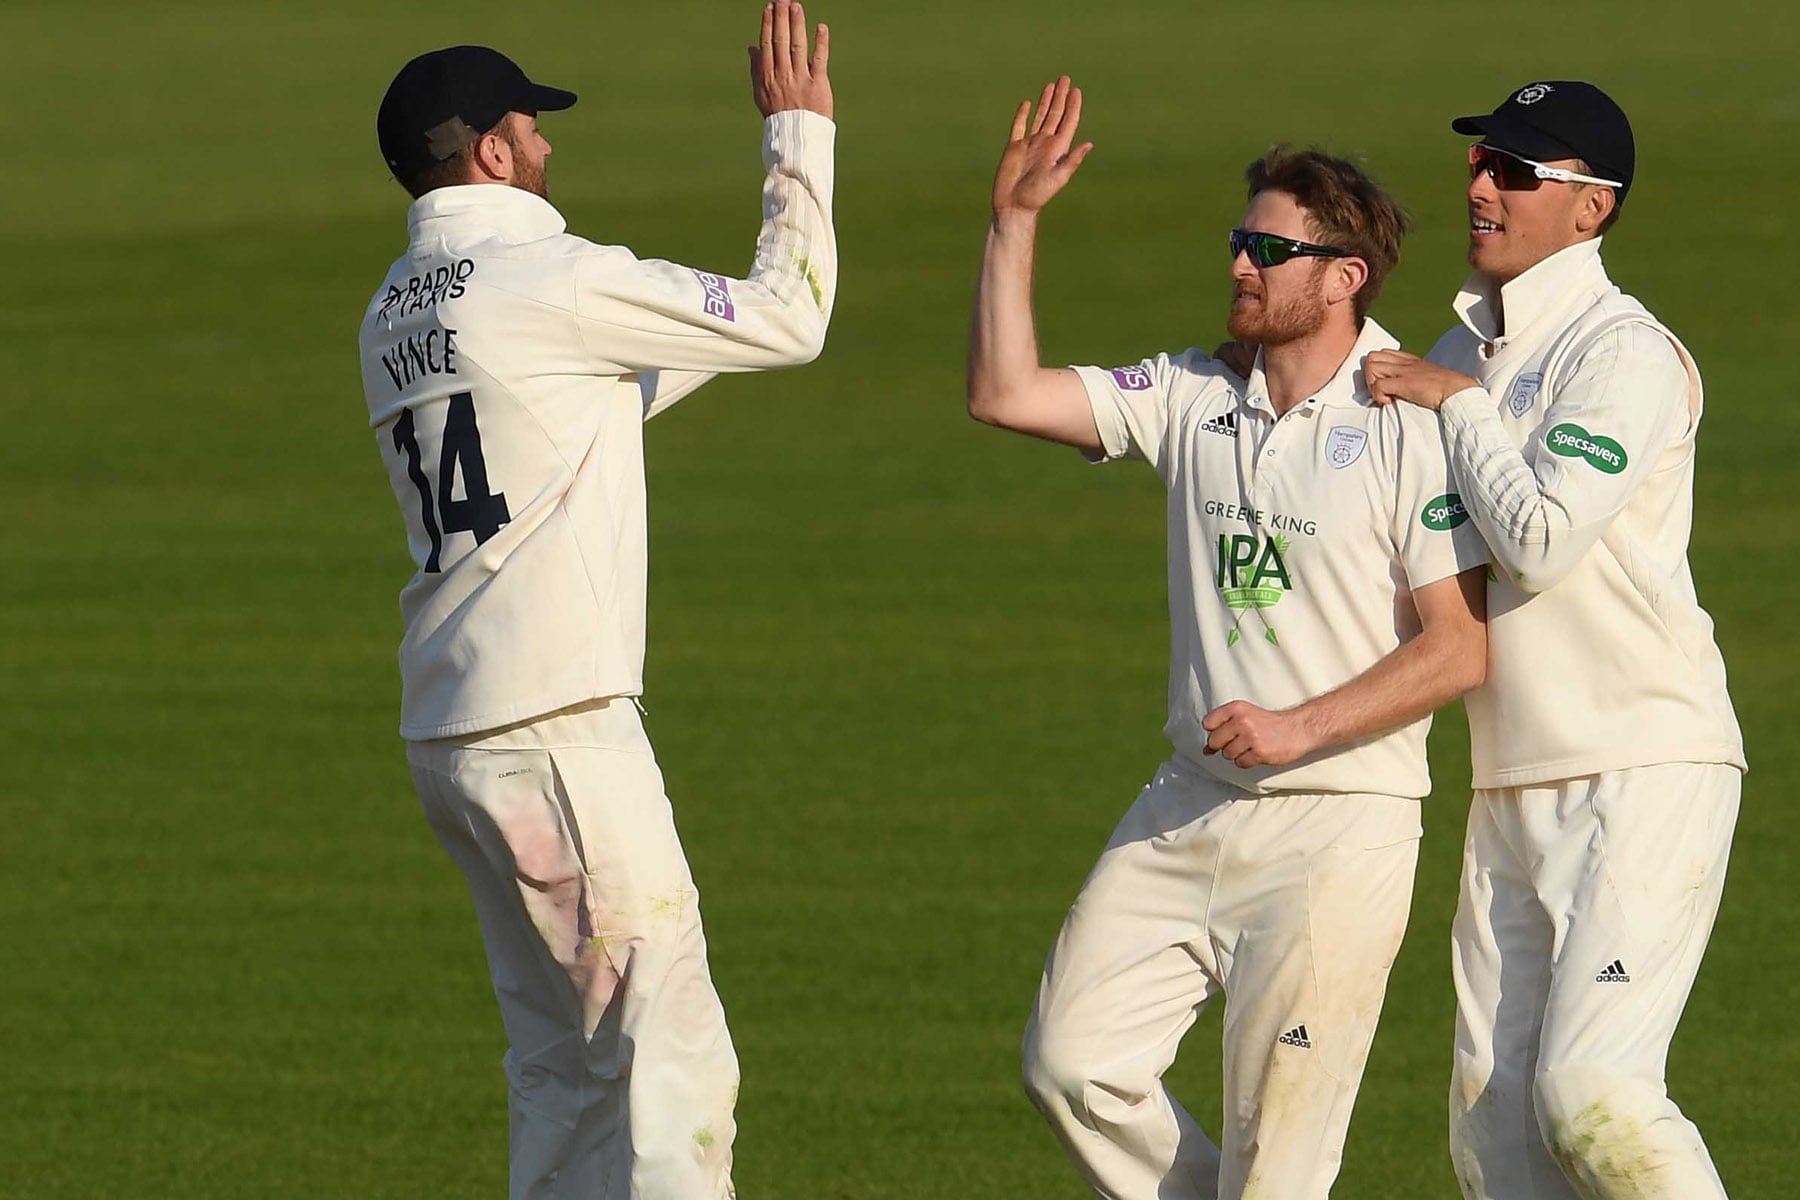 MVP tight at the top as County Championship returns